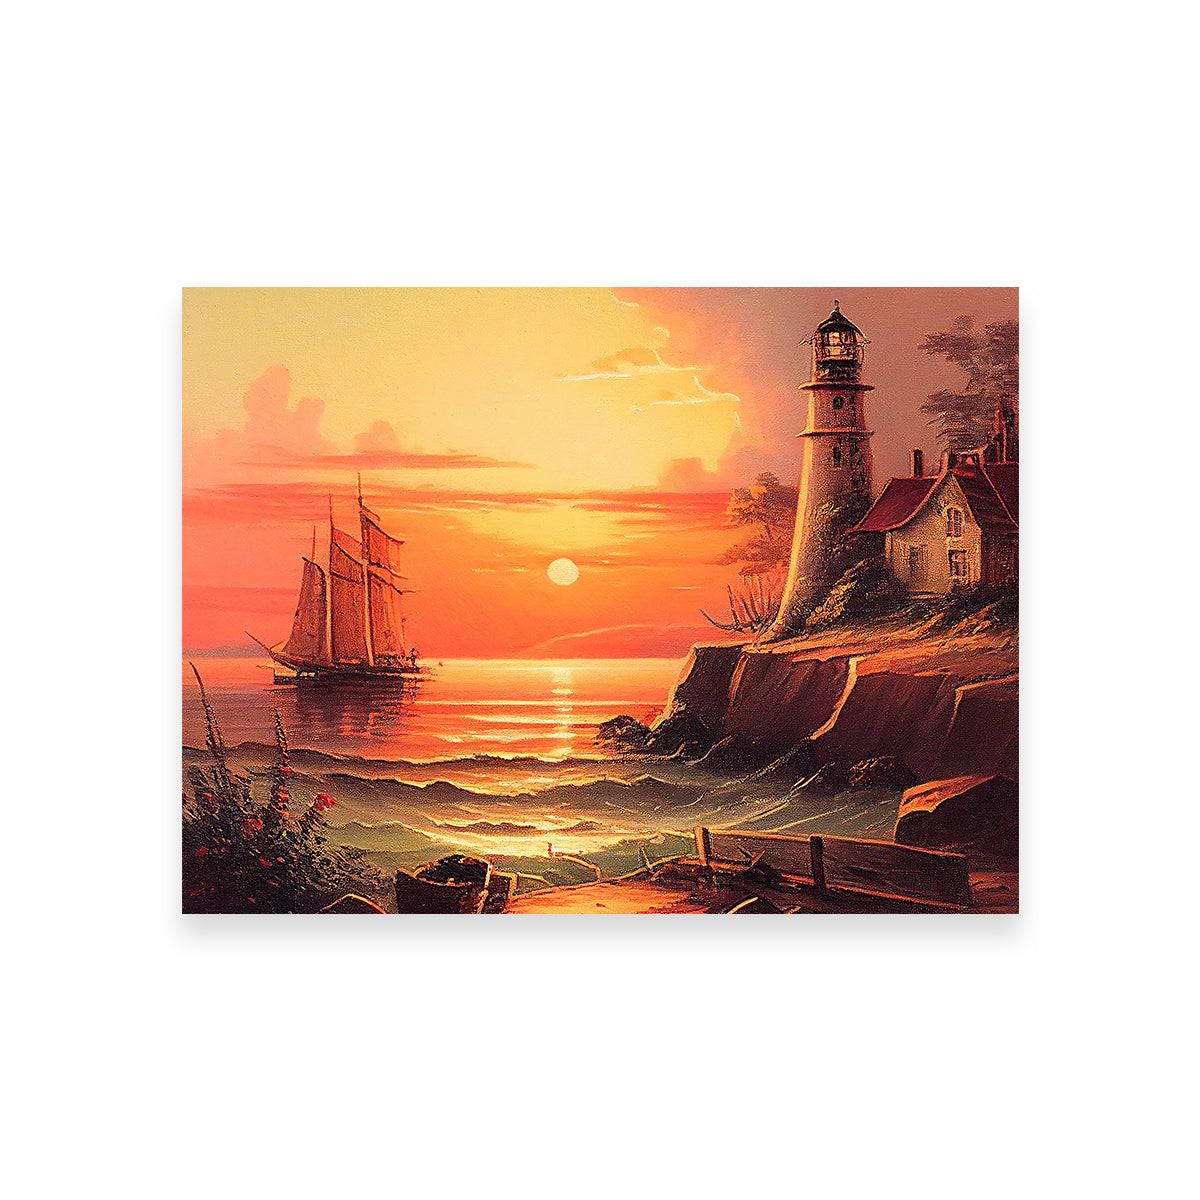 Sailing Past a Lighthouse and Sunset